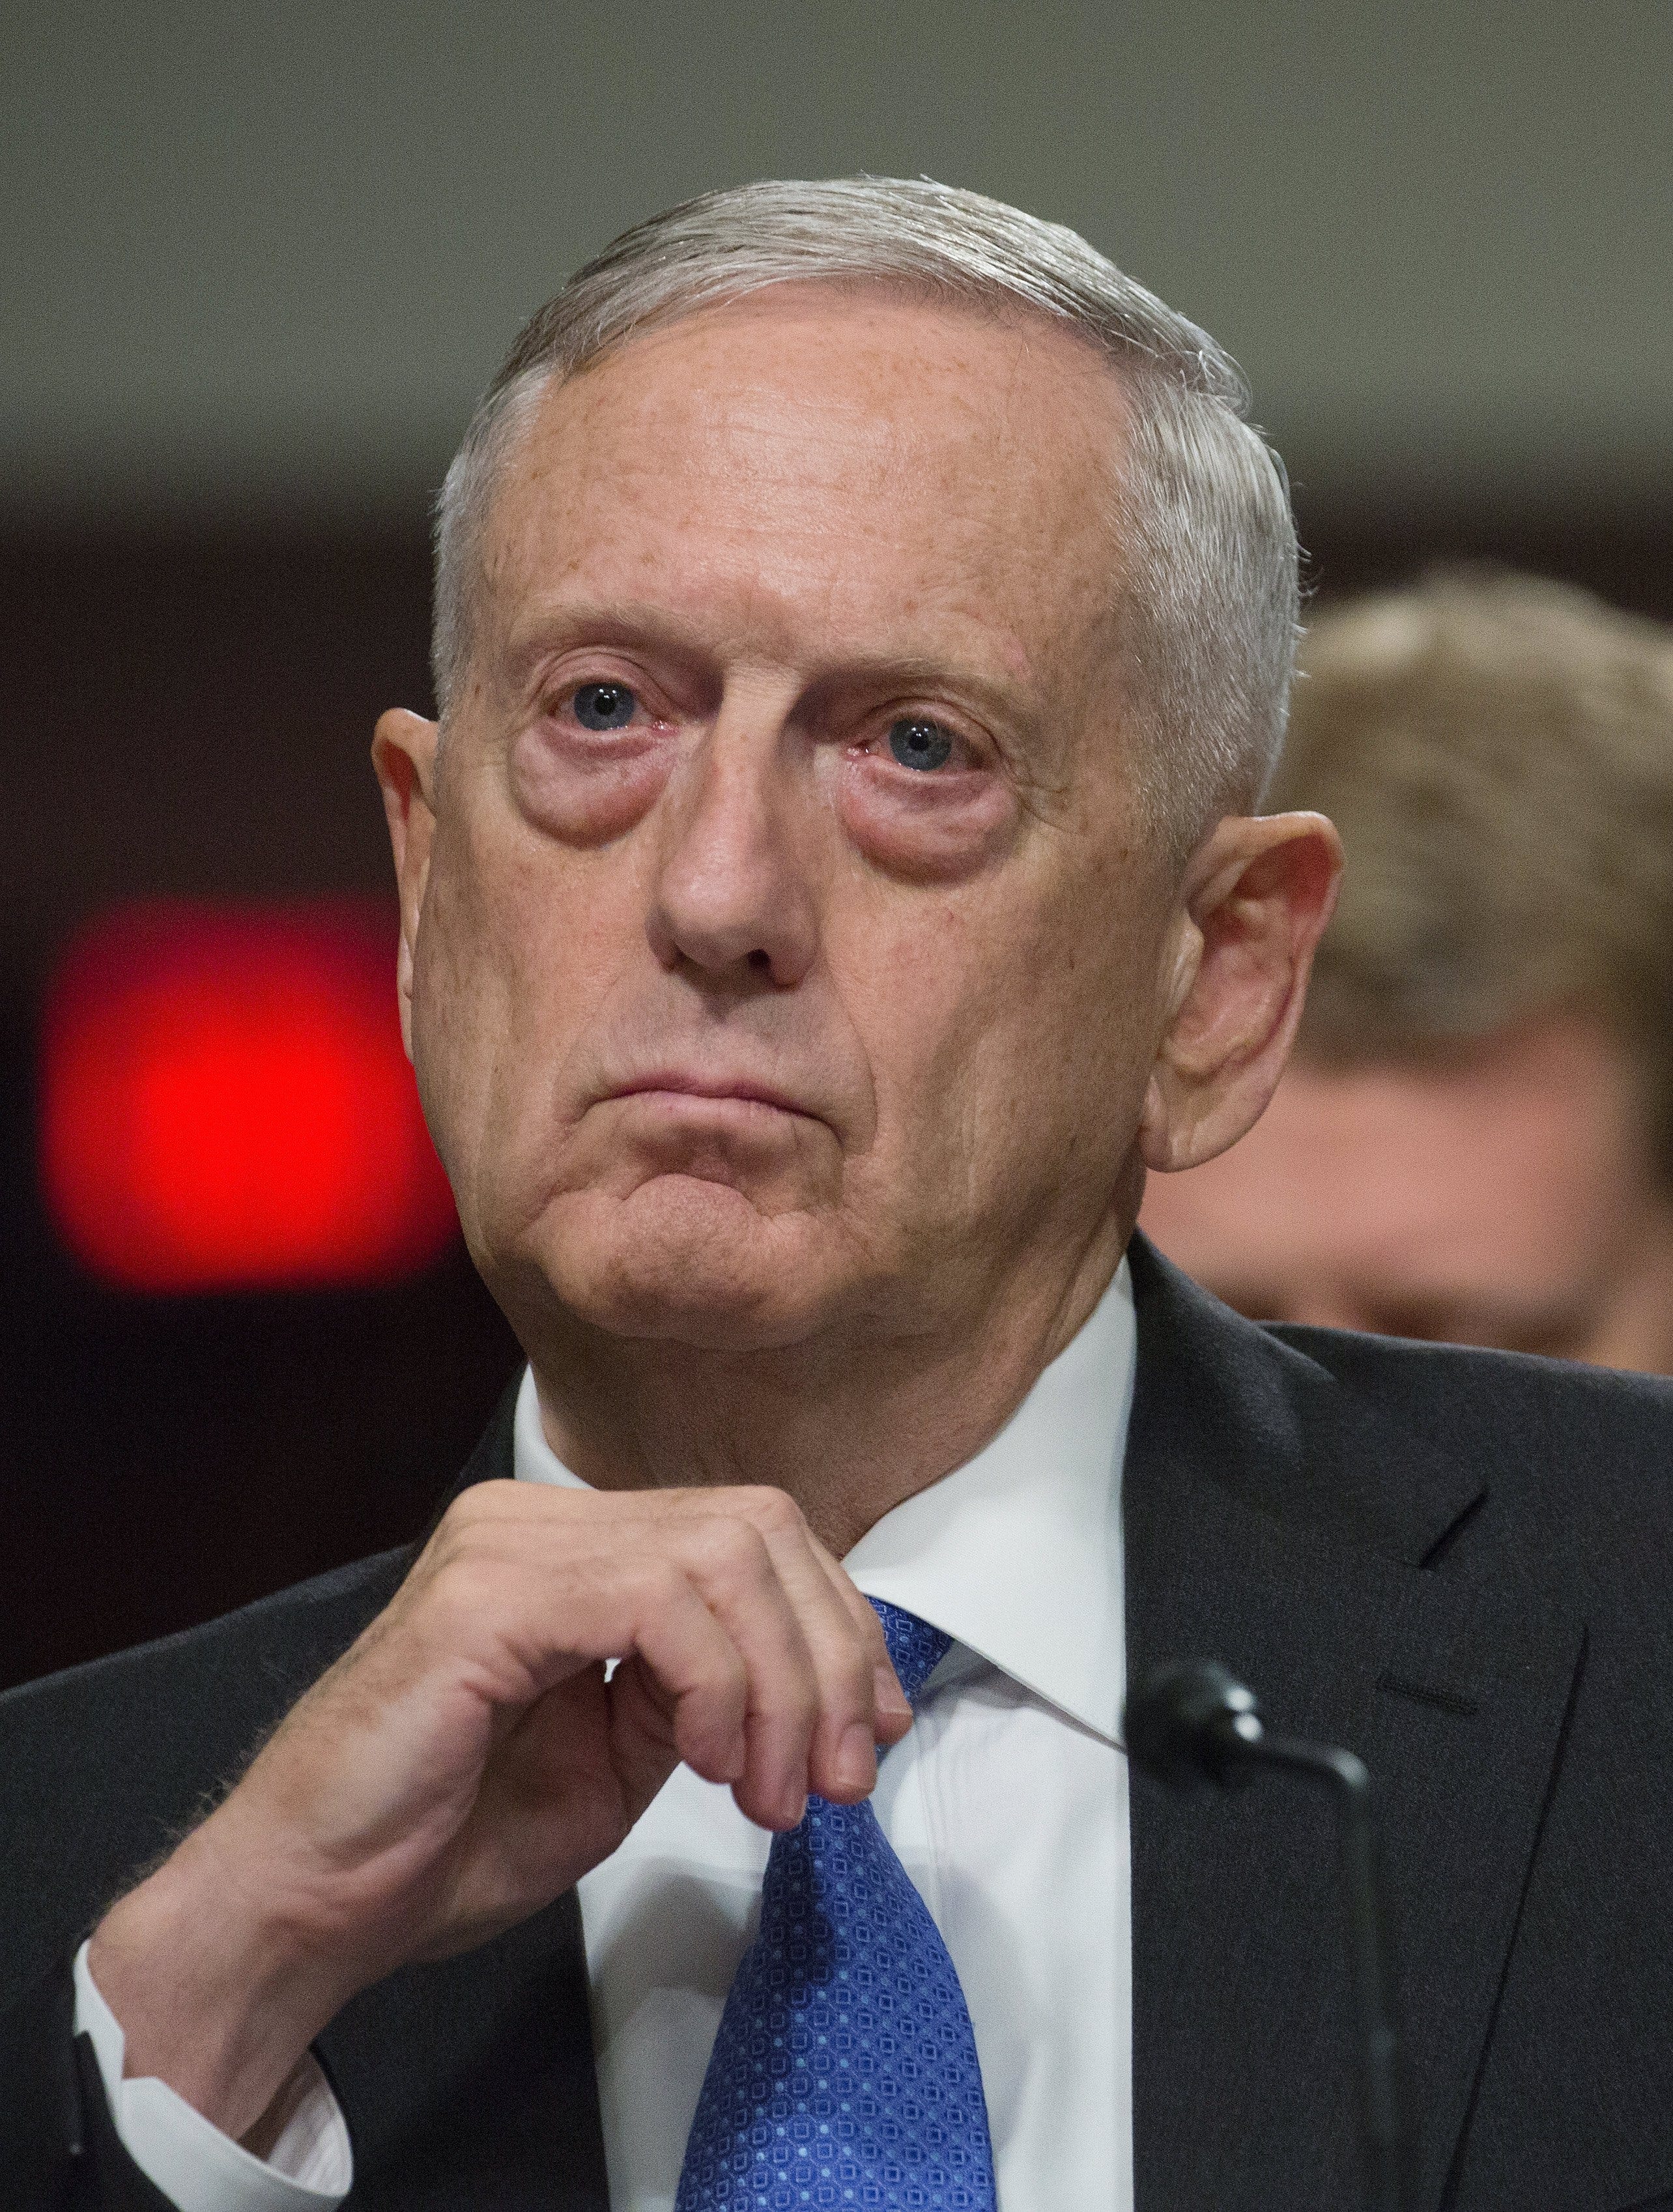 Decision to start or delay transgender troop policy rests with Defense chief Jim Mattis